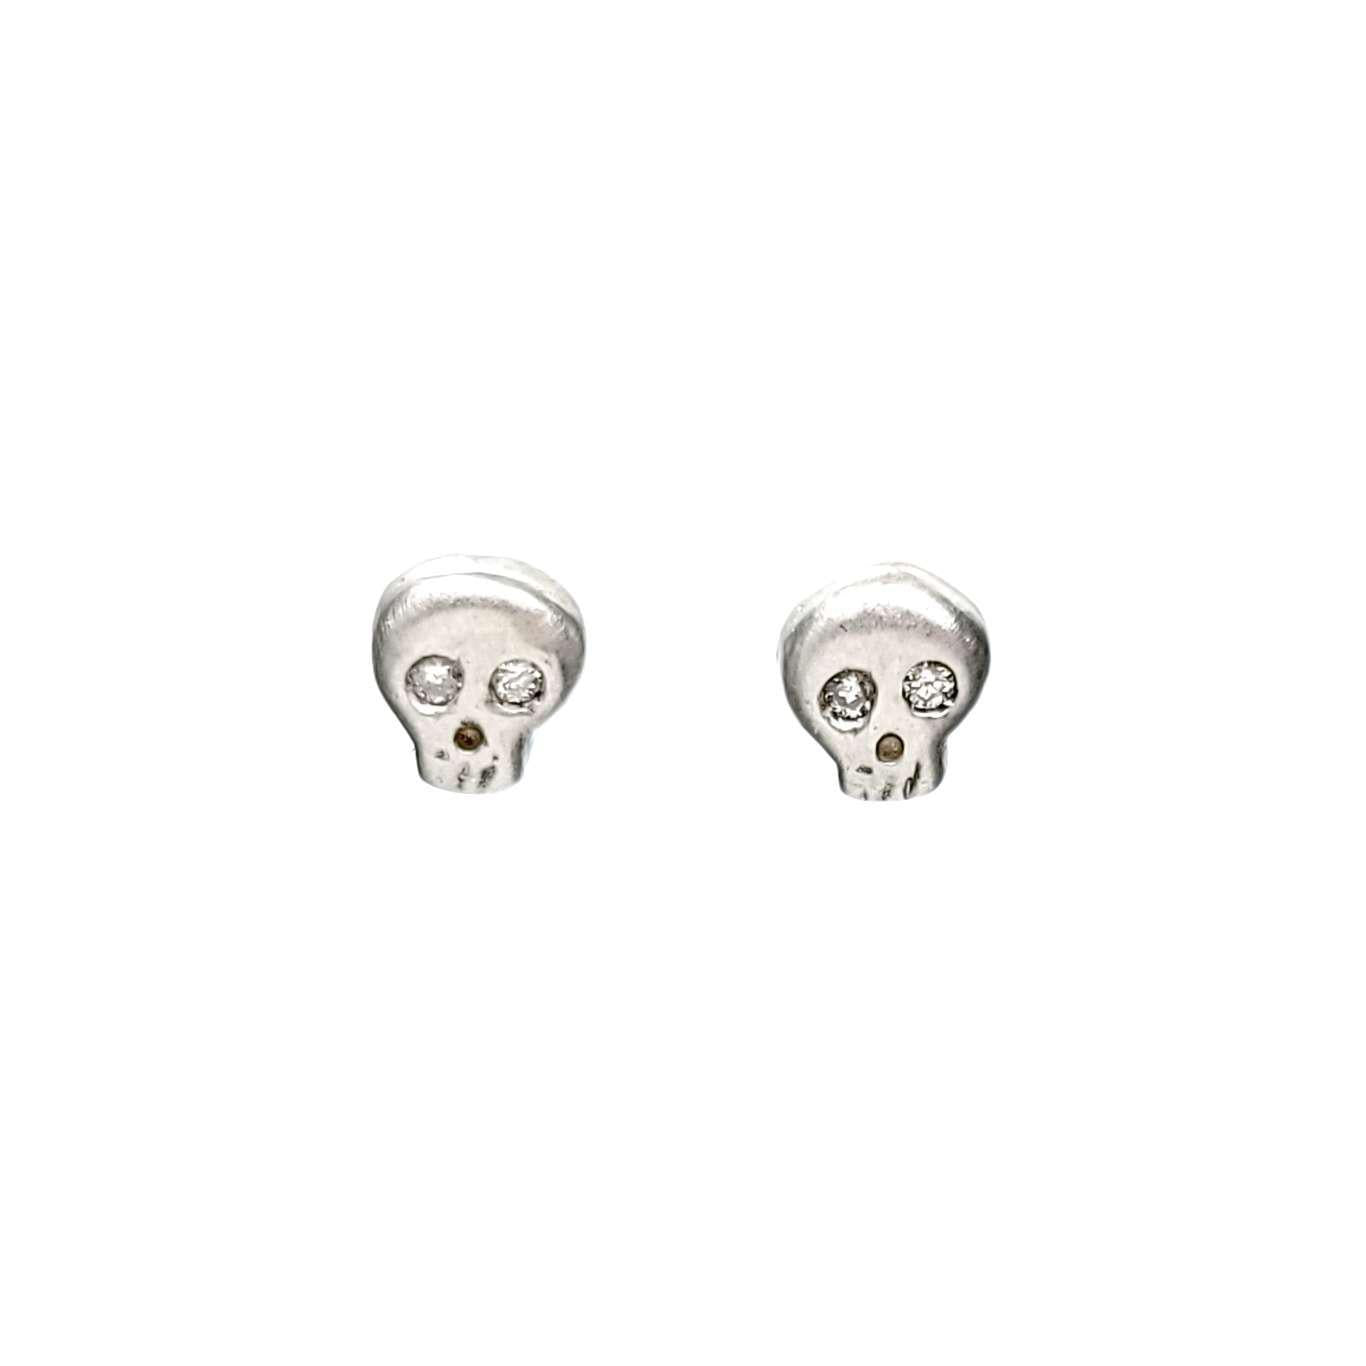 Earrings - Diamond-Eyed Tiny Skull Studs in Sterling Silver by Michelle Chang